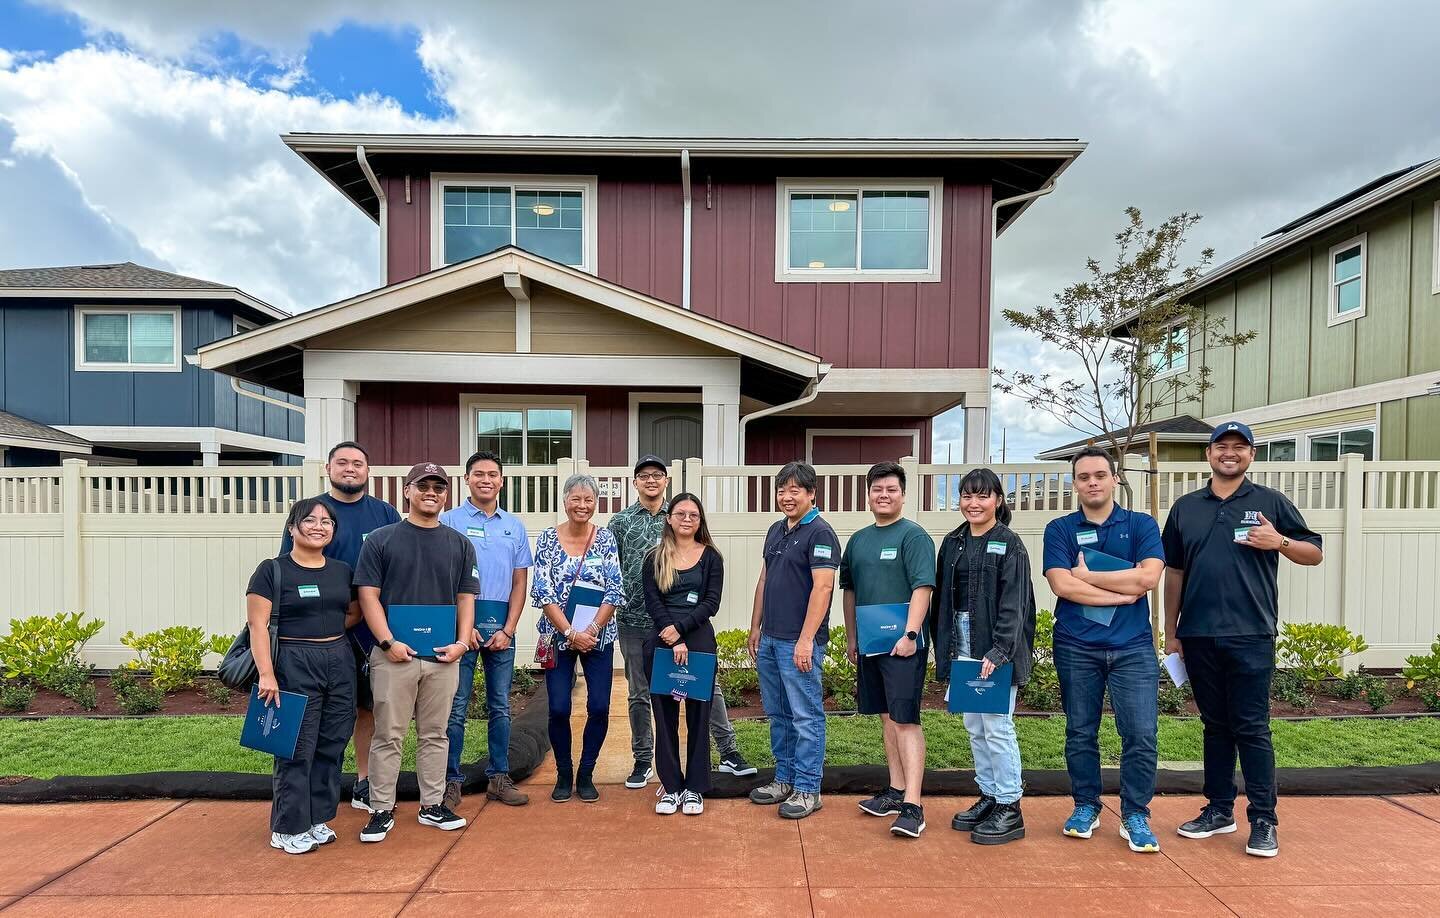 Thank you all to those that were able to join us for our free site tour of Koa Ridge. We&rsquo;d like to thank @castlecookehawaii and #designpartnersinc for guiding us through our walk and showing us the wonderful sights. We are excited and can&rsquo